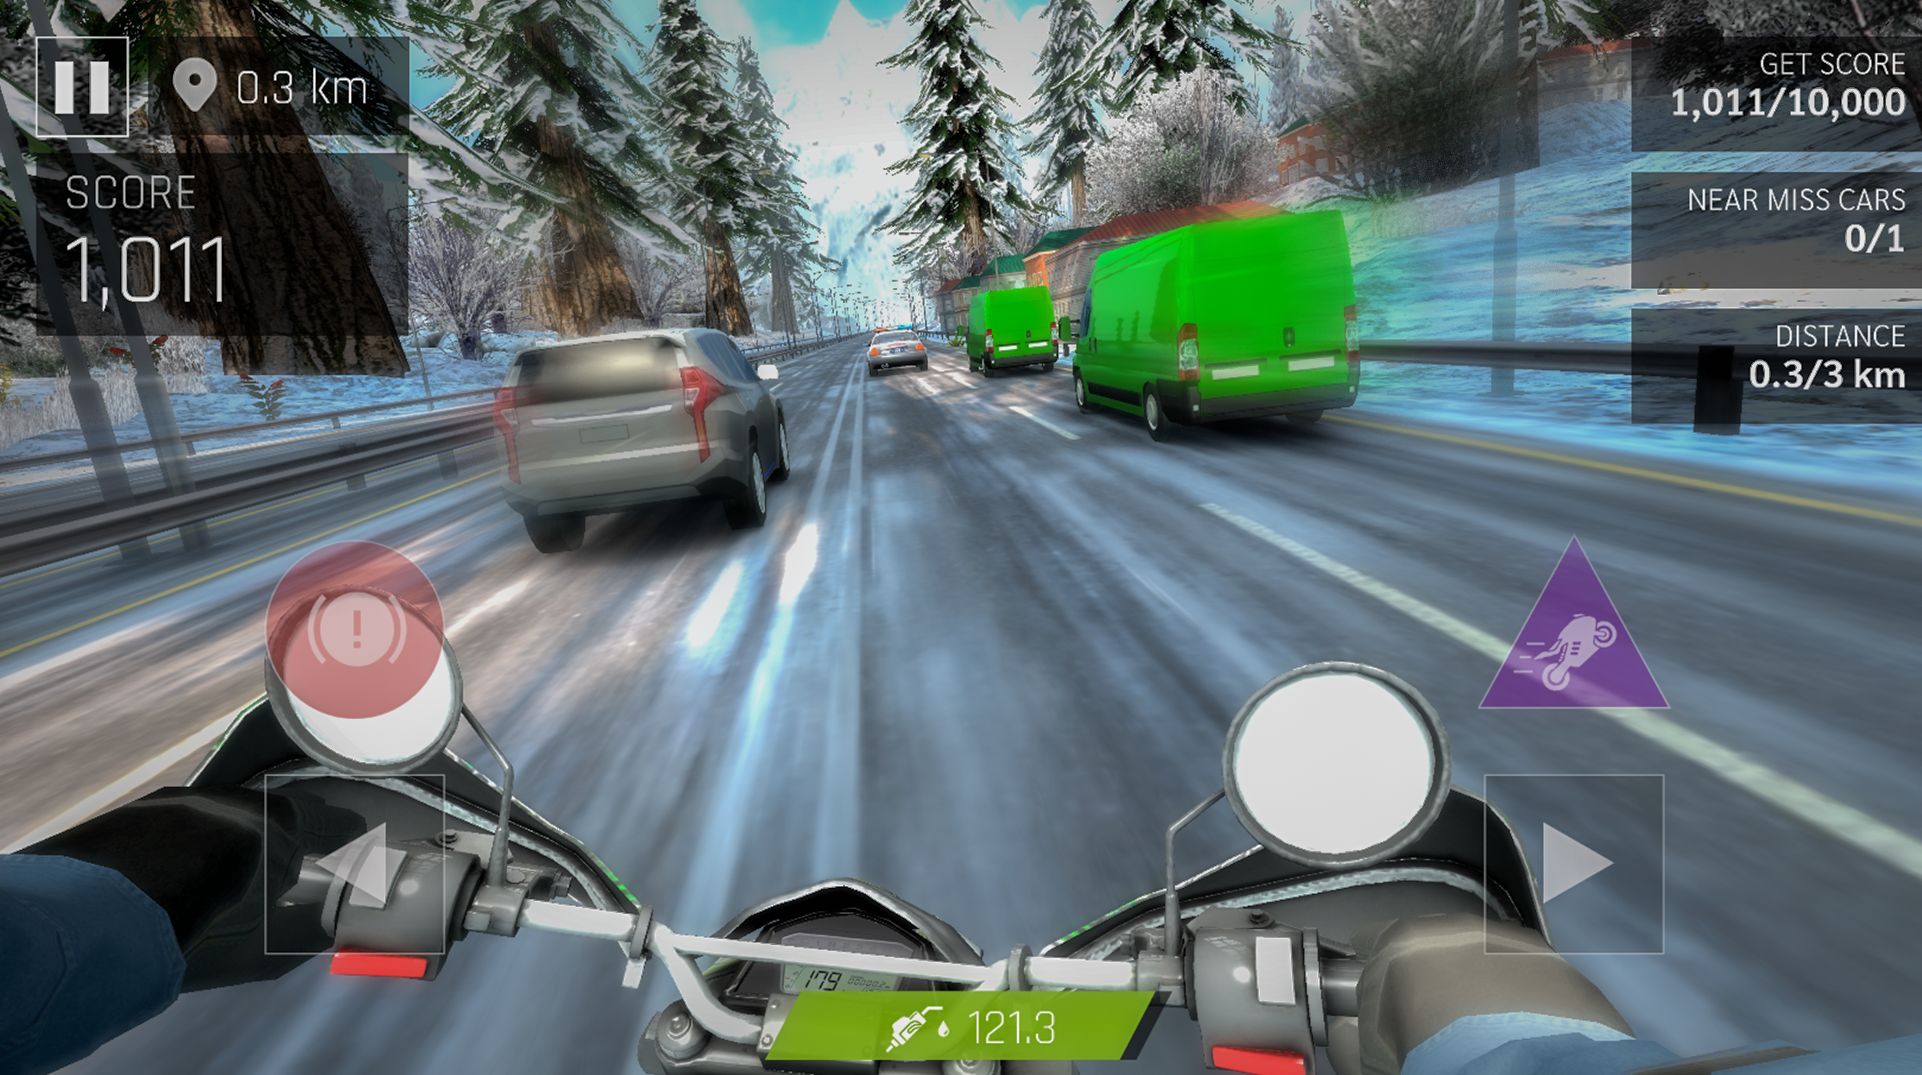 Gameplay of the Real Moto Rider: Traffic Race for Android phone or tablet.